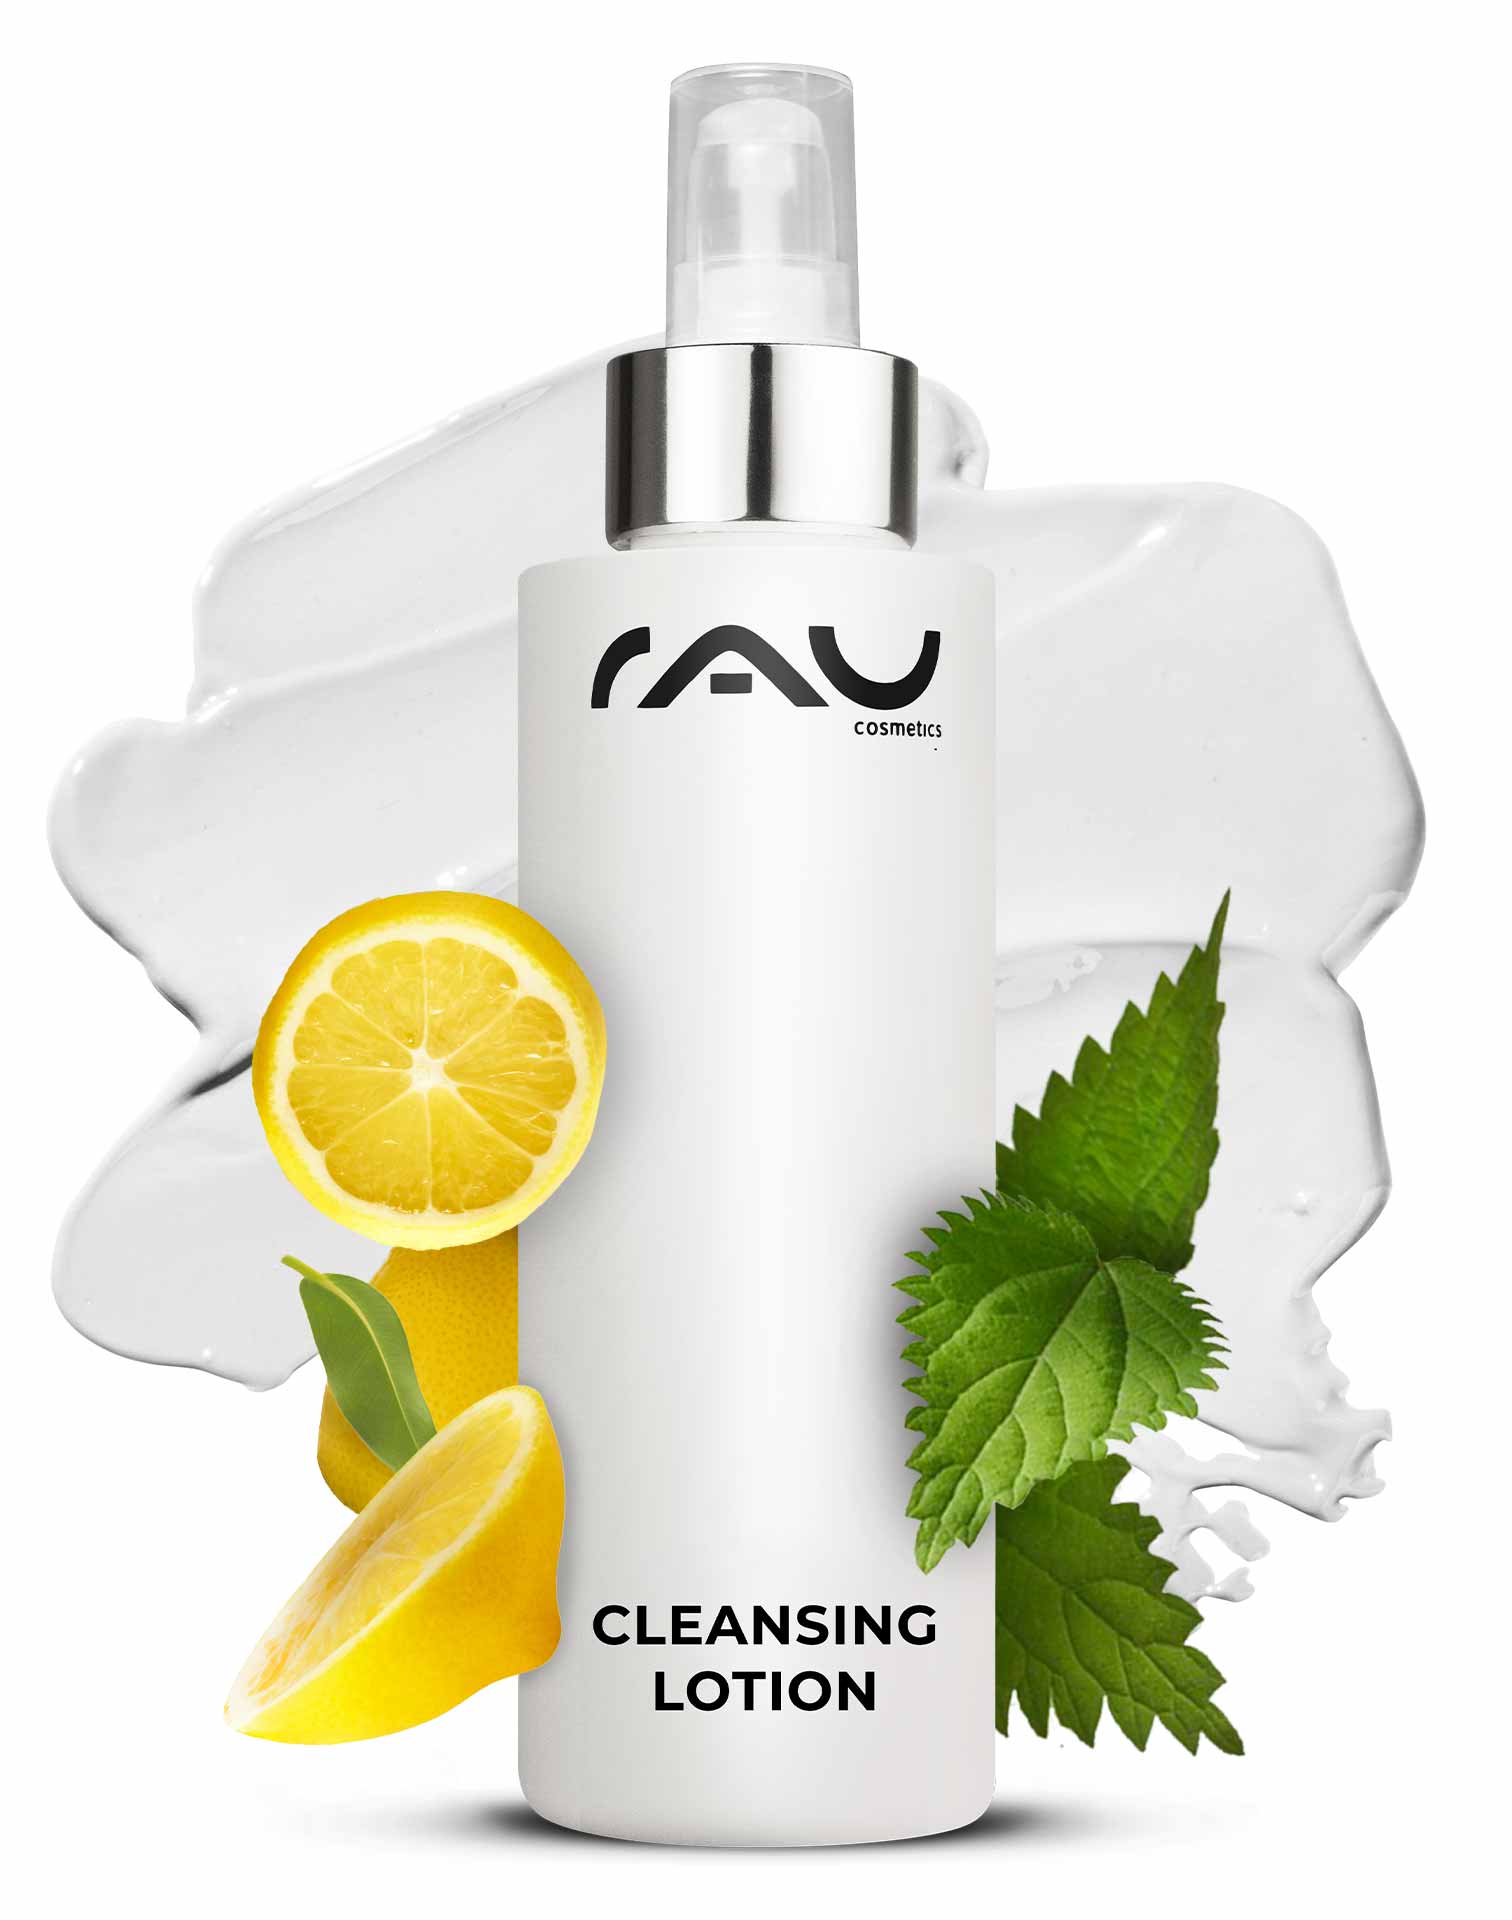 Cleansing Lotion 200 ml - thorough cleansing lotion